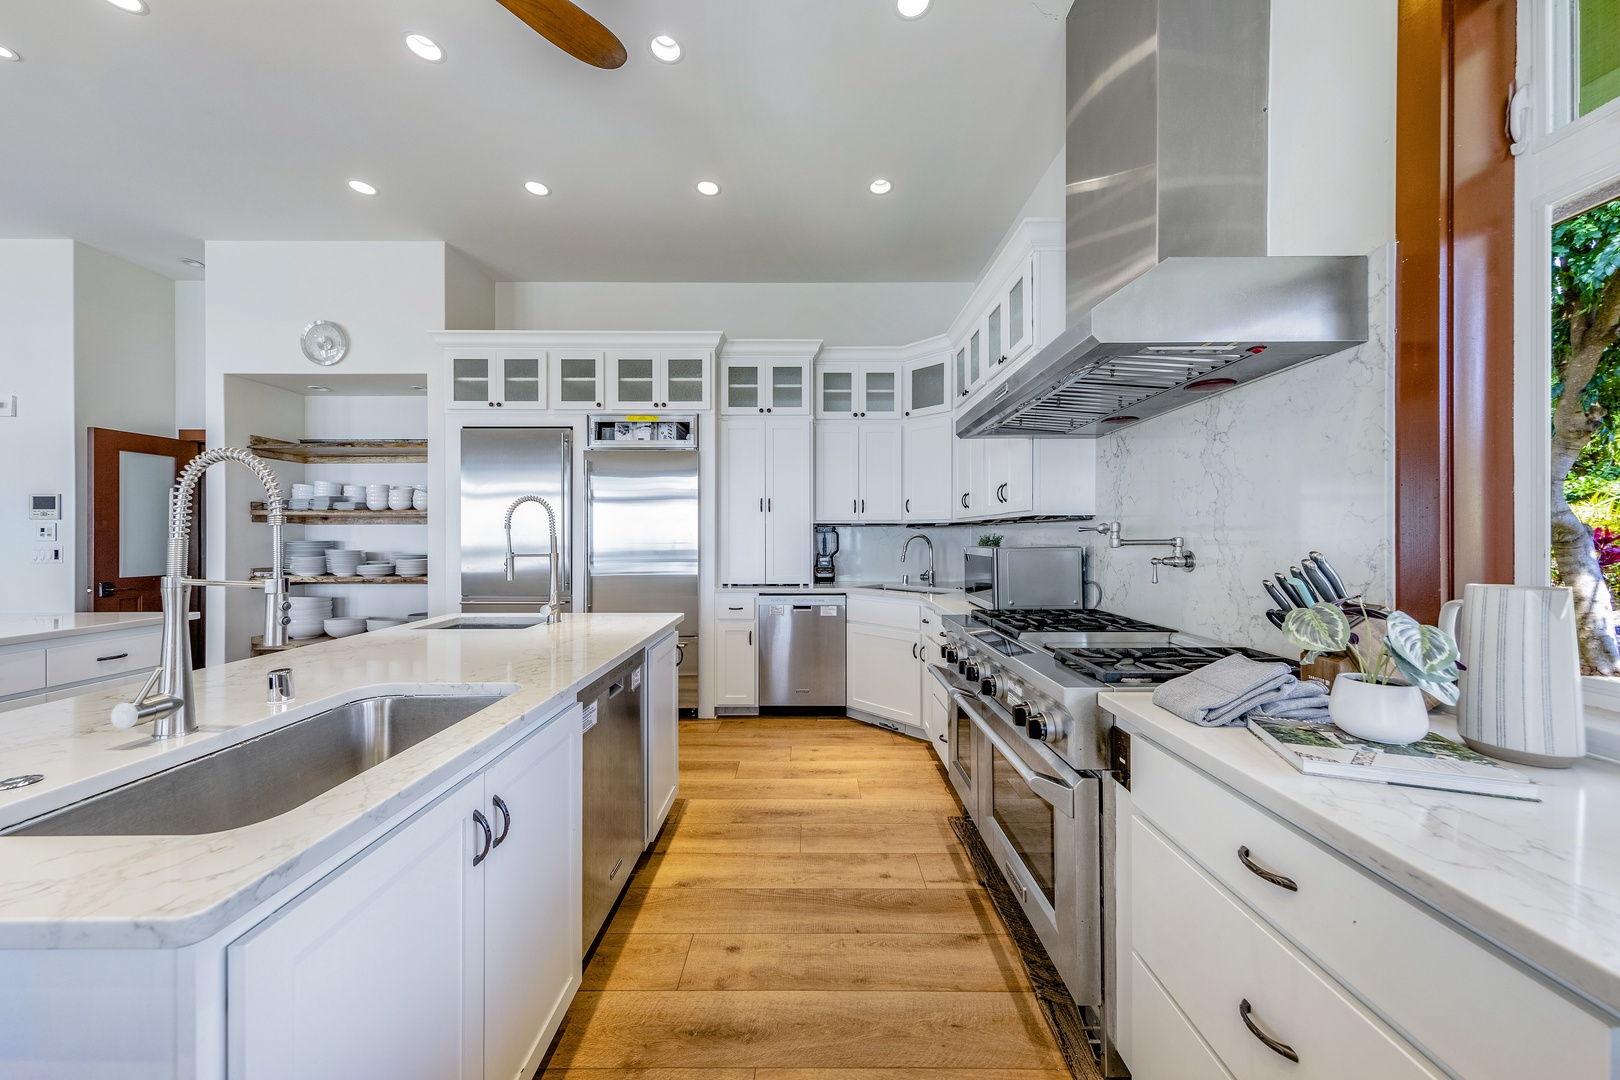 Kailua Kona Vacation Rentals, Kailua Kona Estate** - With lots of storage and counter space, this kitchen is a chef's dream